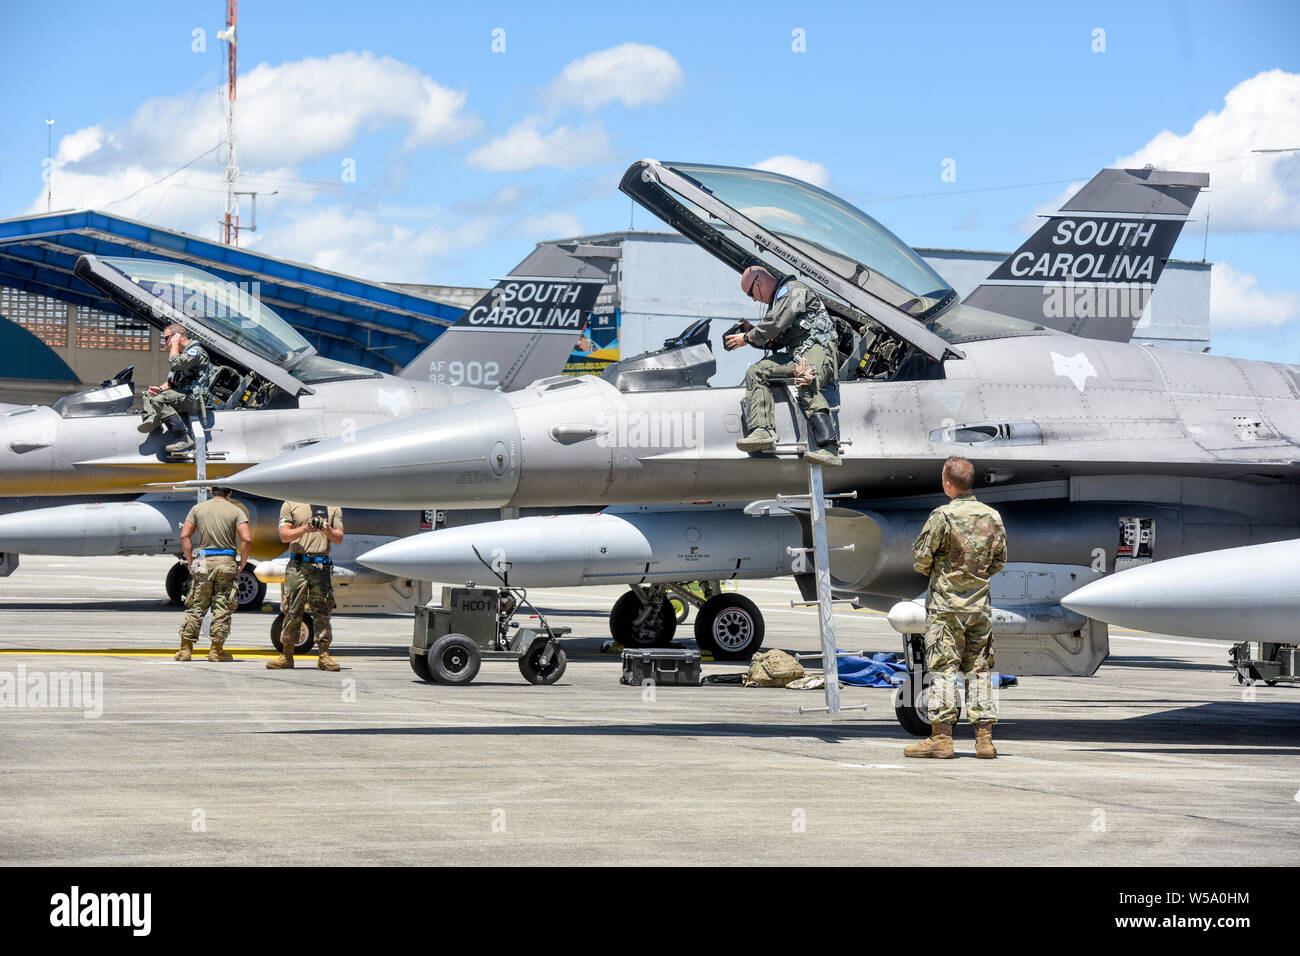 The South Carolina Air National Guard is participating in the week-long Relámpago IV exercise with four 169th Fighter Wing F-16 Fighting Falcon Fighter jets at Comando Aereo de Combate Number 5 (CACOM 5) in Rionegro Colombia, July 19, 2019.  United States military participation in the exercise provides an opportunity to strengthen our military-to-military relationships with regional partners and provides the opportunity to meet with our Colombian air force counterparts and facilitate interoperability, which can be exercised in future cooperation events such as additional exercises and training Stock Photo